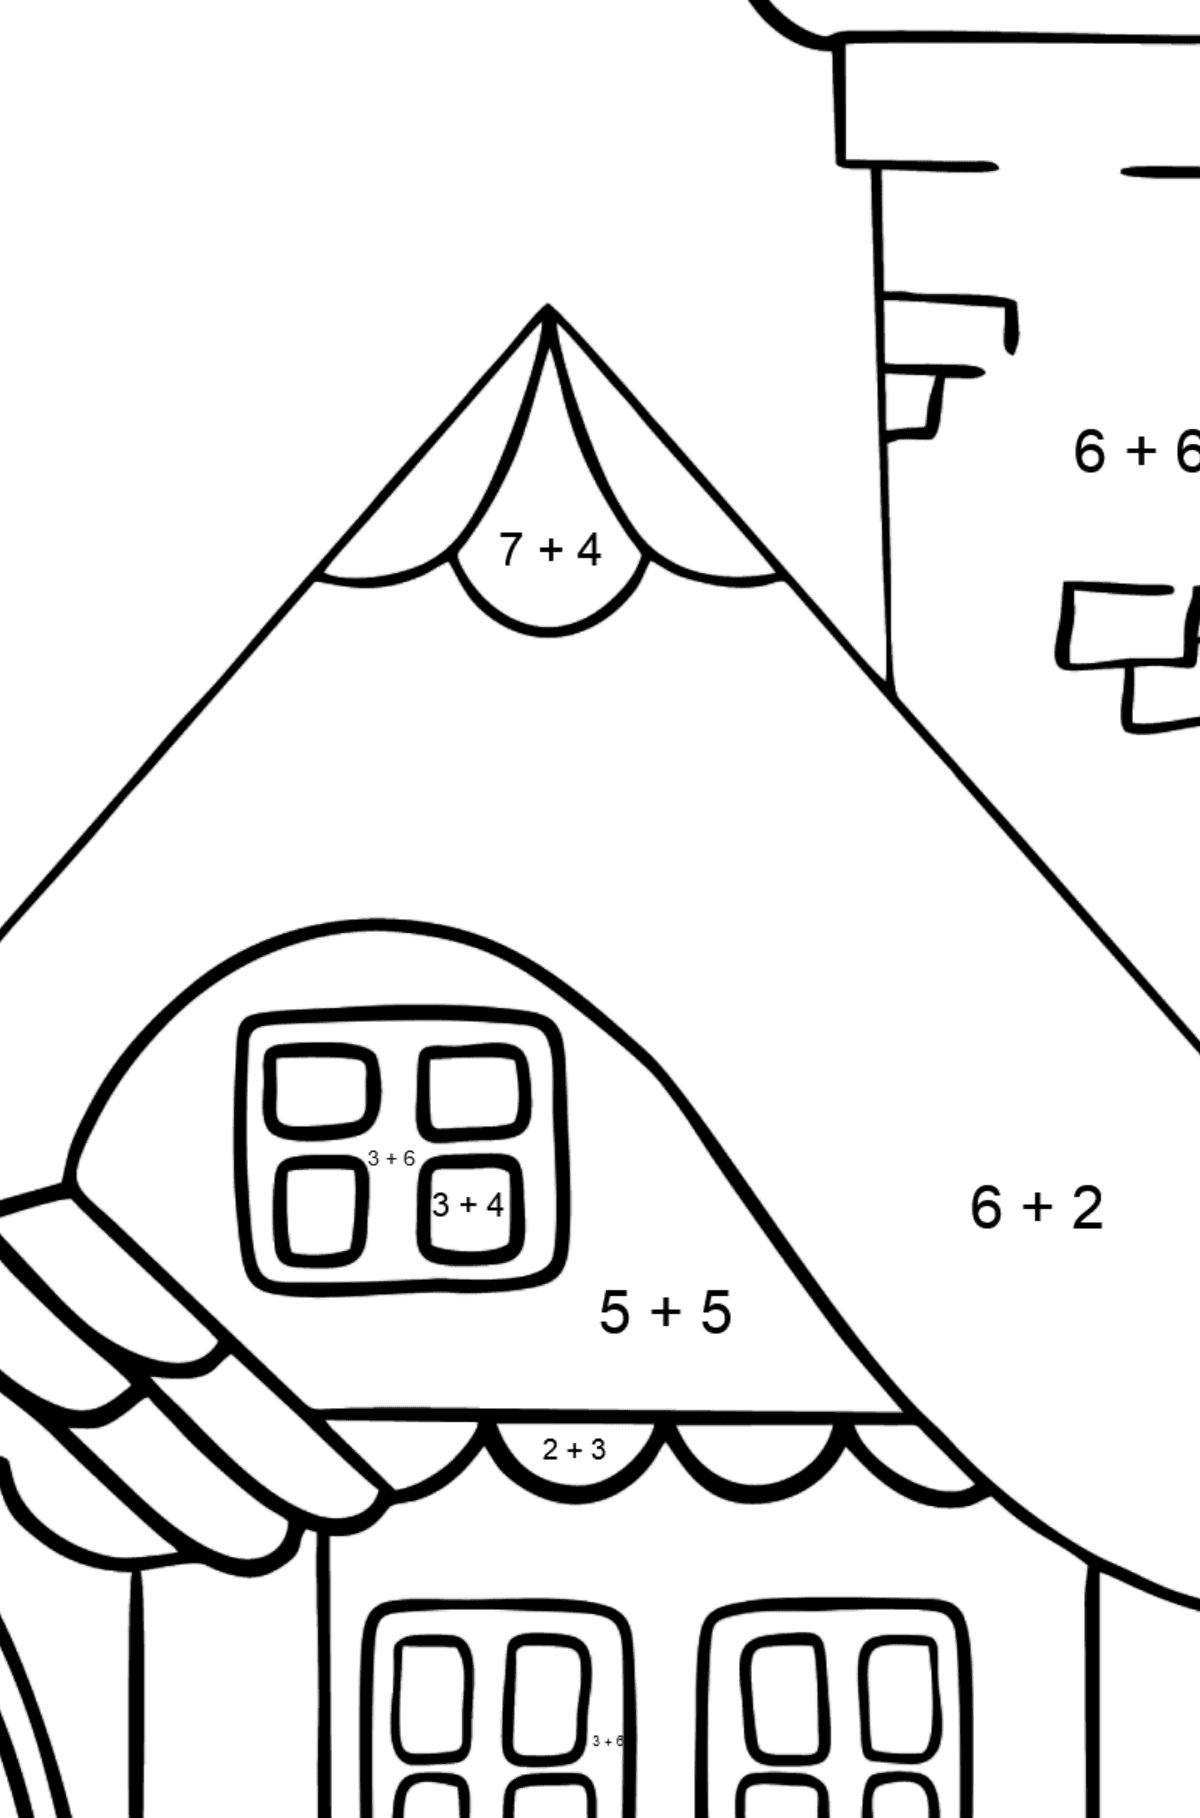 Coloring Page - A Wonderful House - Math Coloring - Addition for Kids